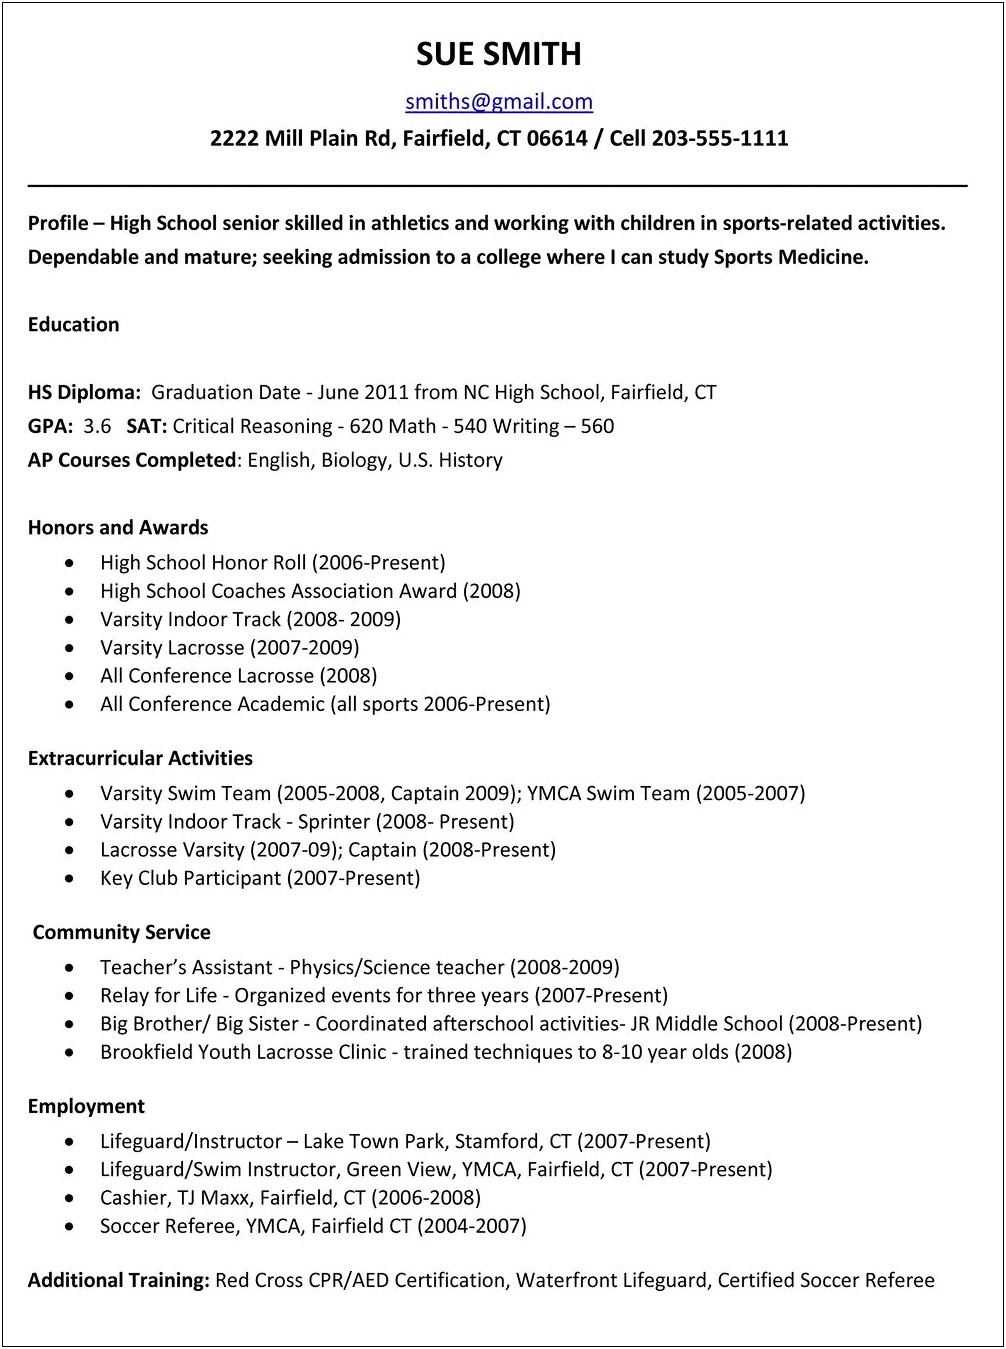 Curricular Activities Examples In Resume